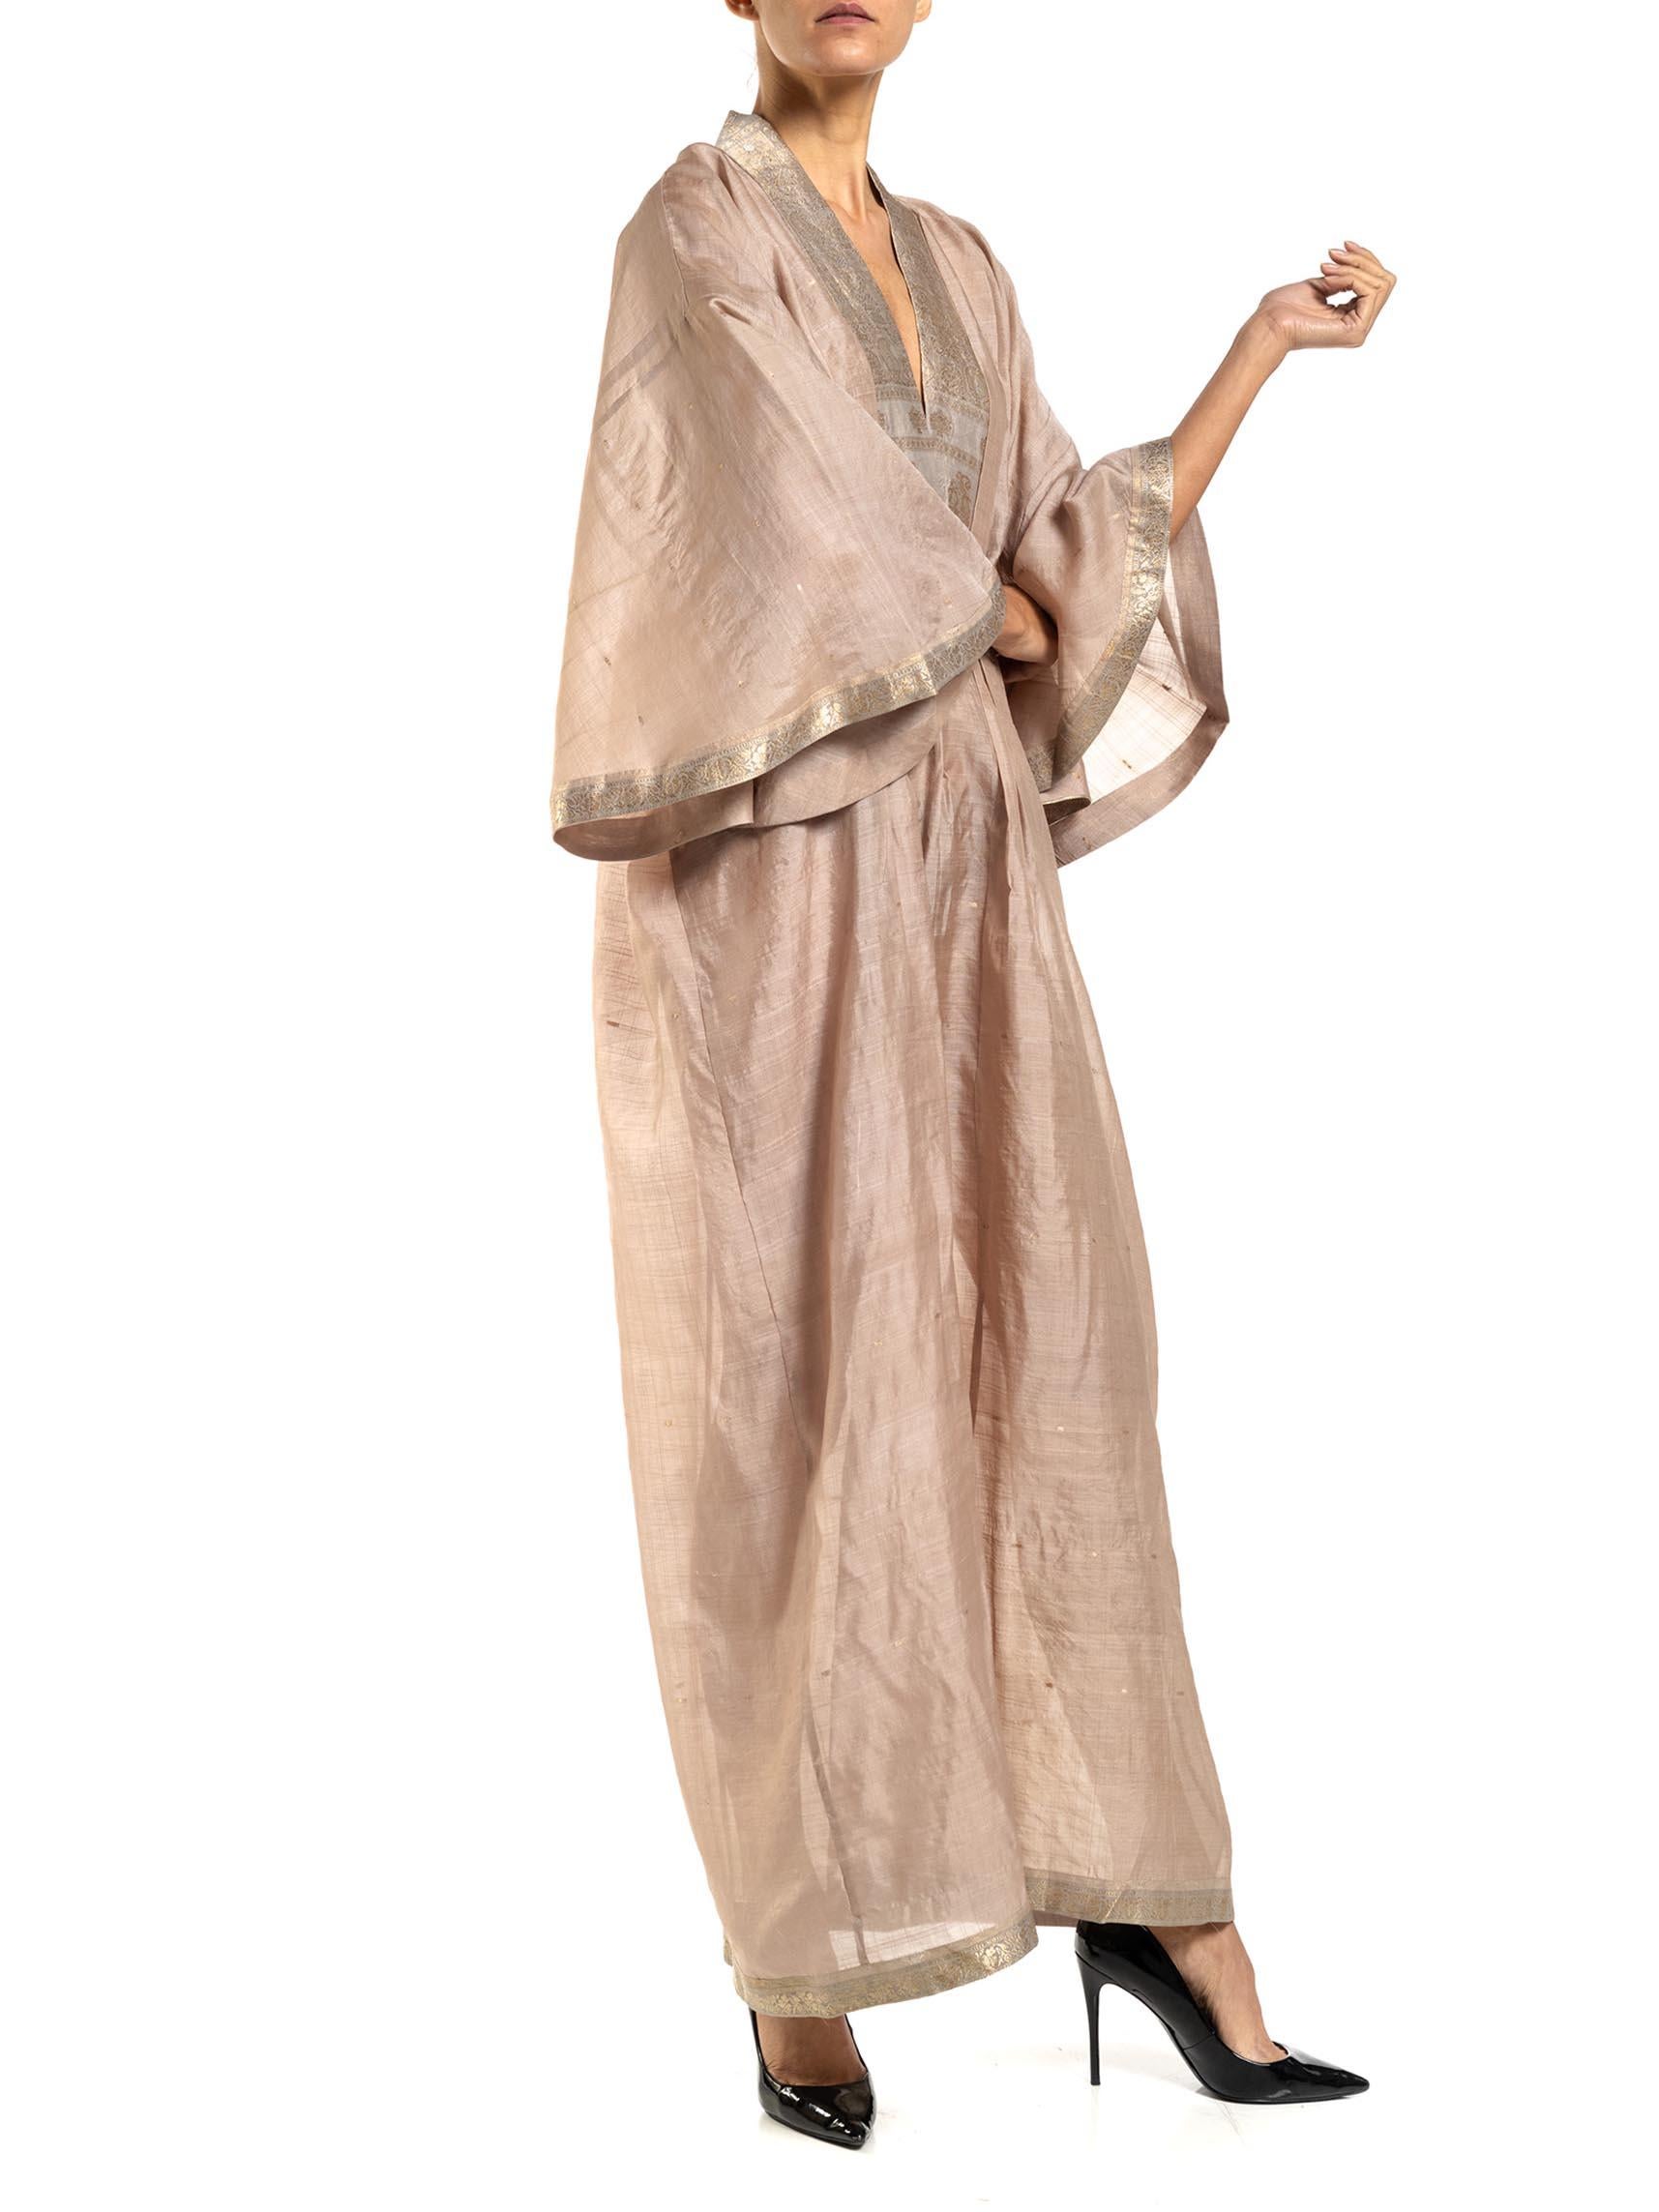 MORPHEW COLLECTION Dusty Pink Silk Kaftan Made From Vintage Sari For Sale 2